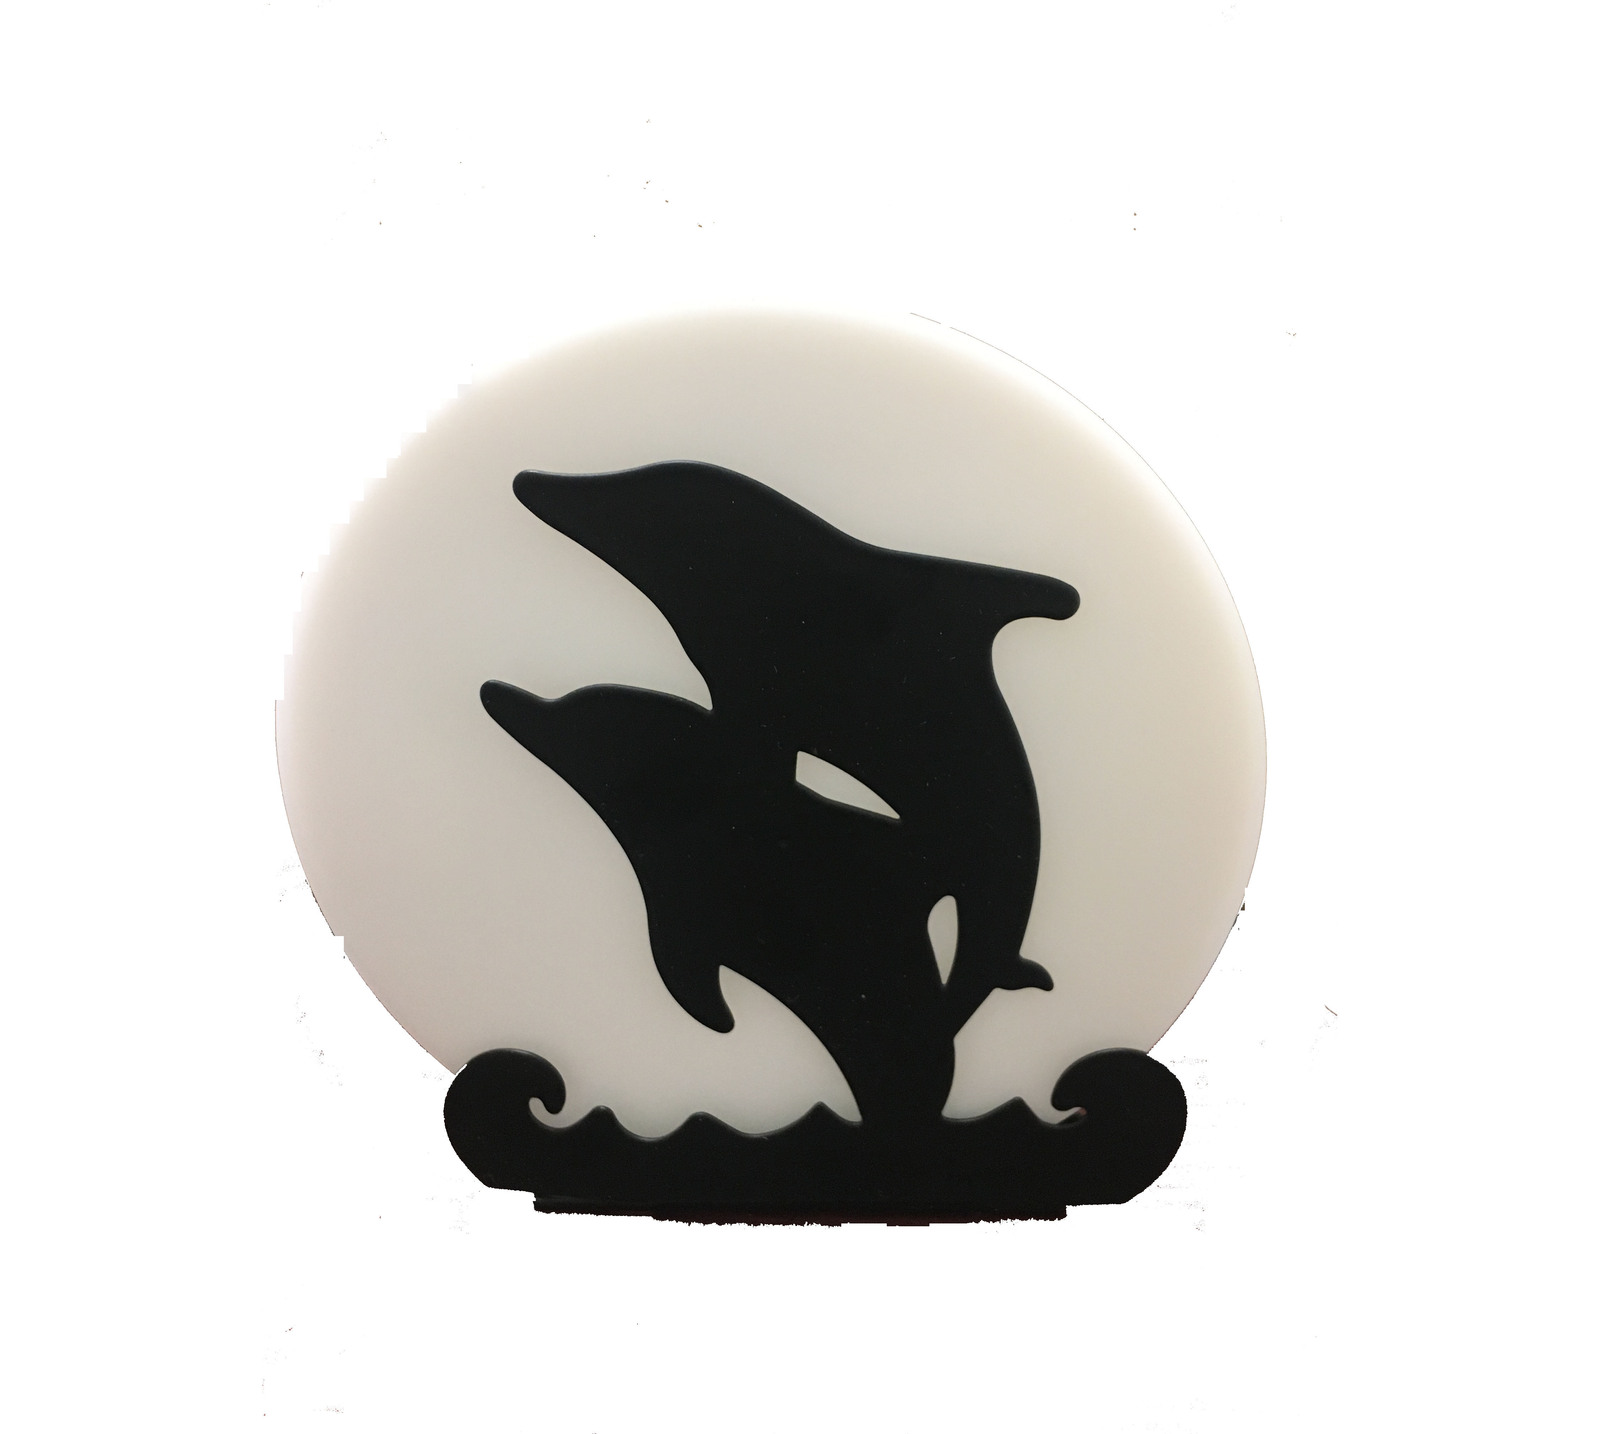 DOLPHINS SWIMMING DECORATIVE CANDLE HOLDER - $6.25